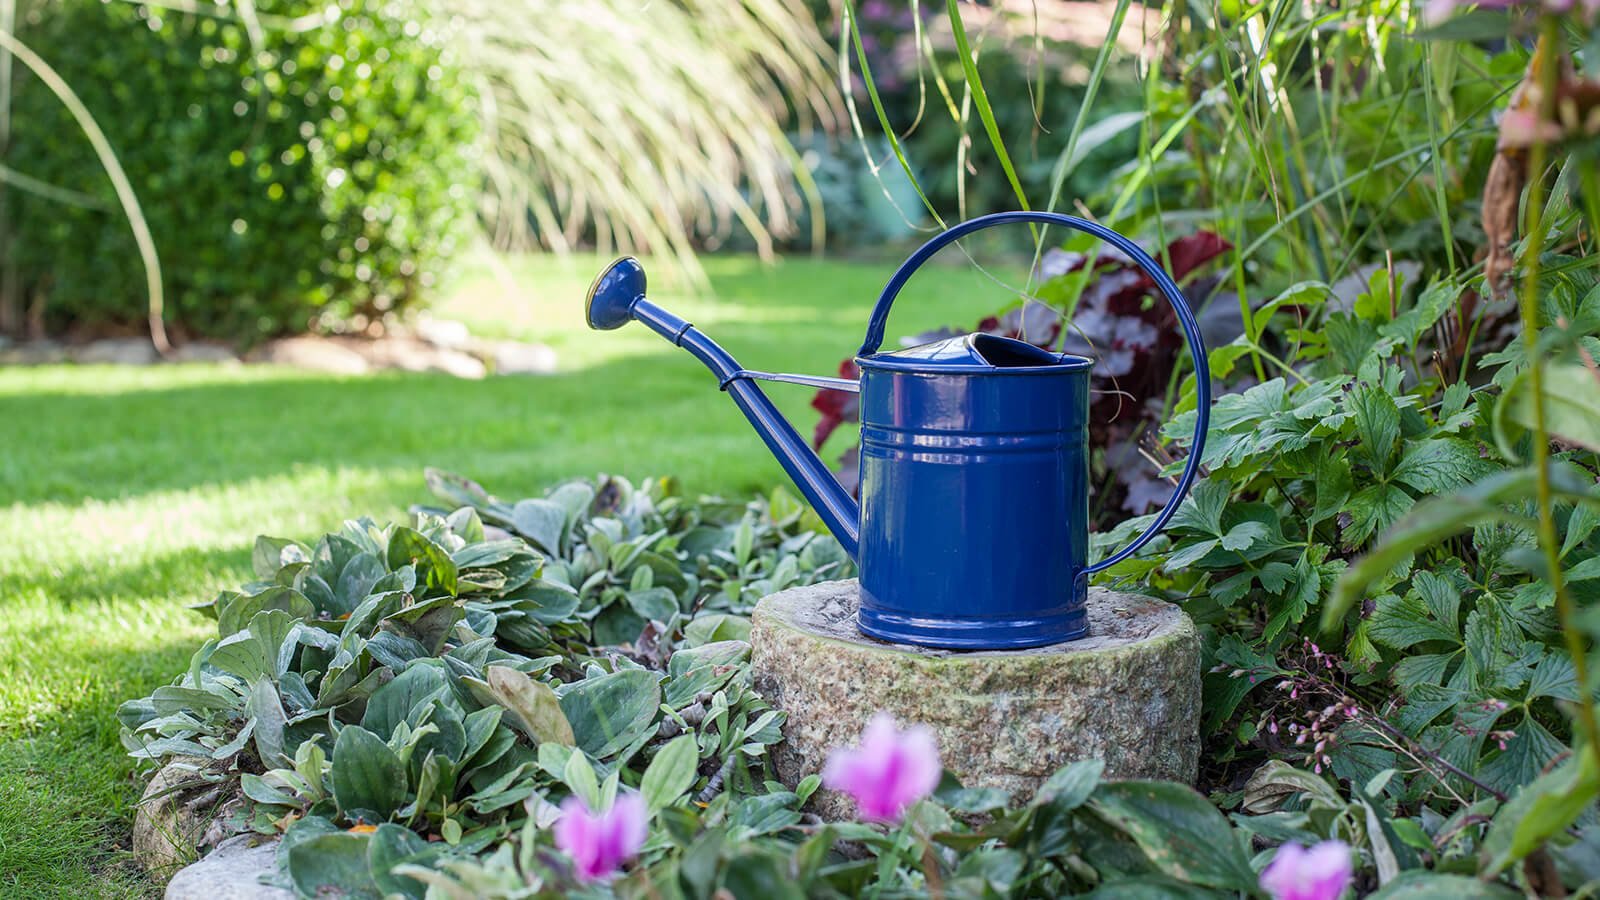 Garden tools and accessories for every need - Buy at Newport